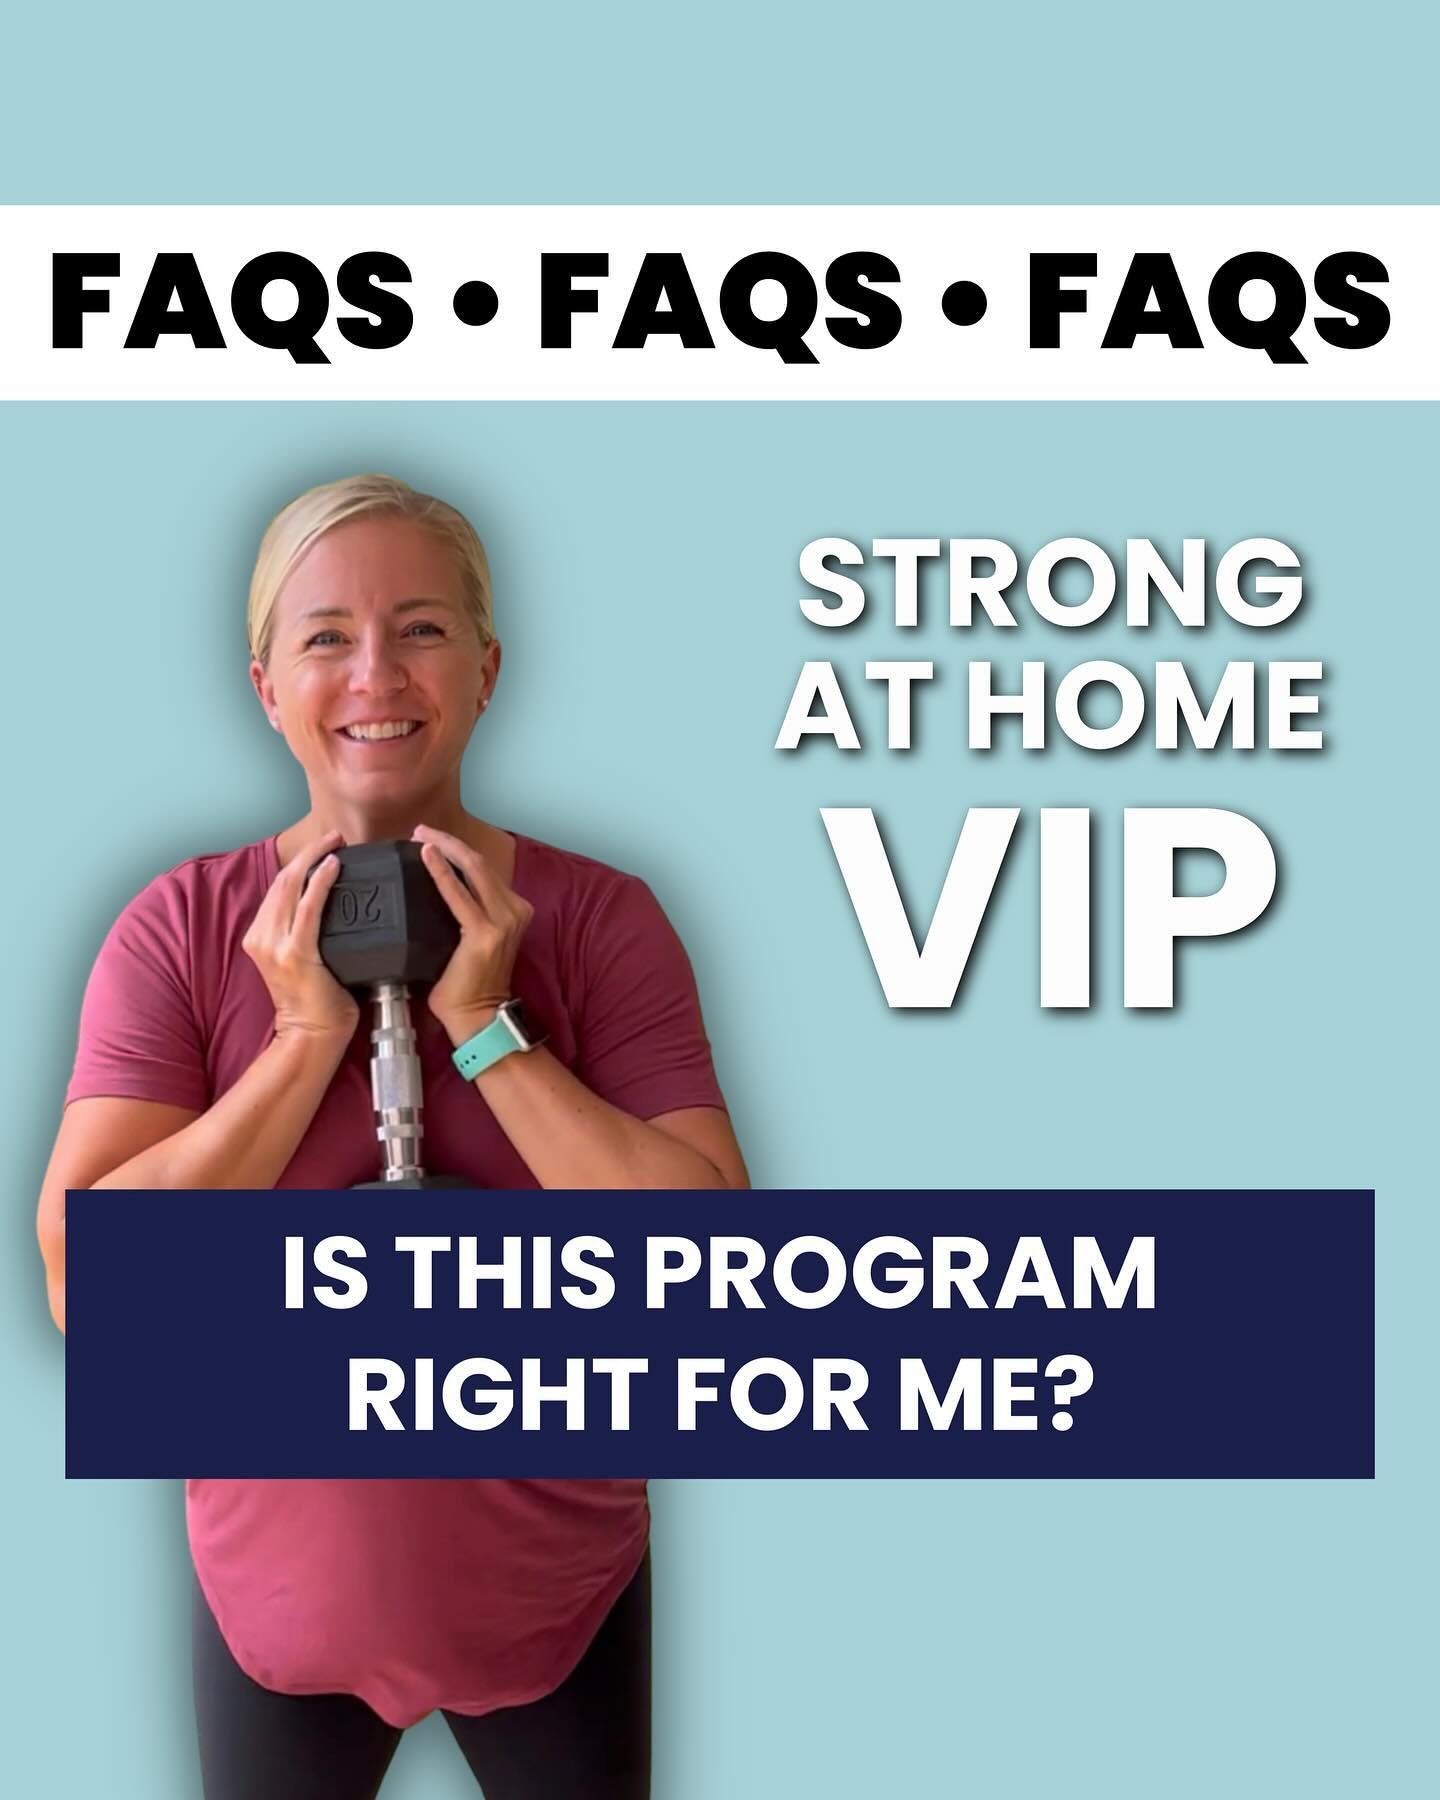 💪🏻 Strong at Home VIP is a one-on-one virtual strength training program for busy moms who want to get strong &amp; fit without leaving their house (with the accountability of weekly appointments)!

🔥 My goal is ultimately to teach you how to stren